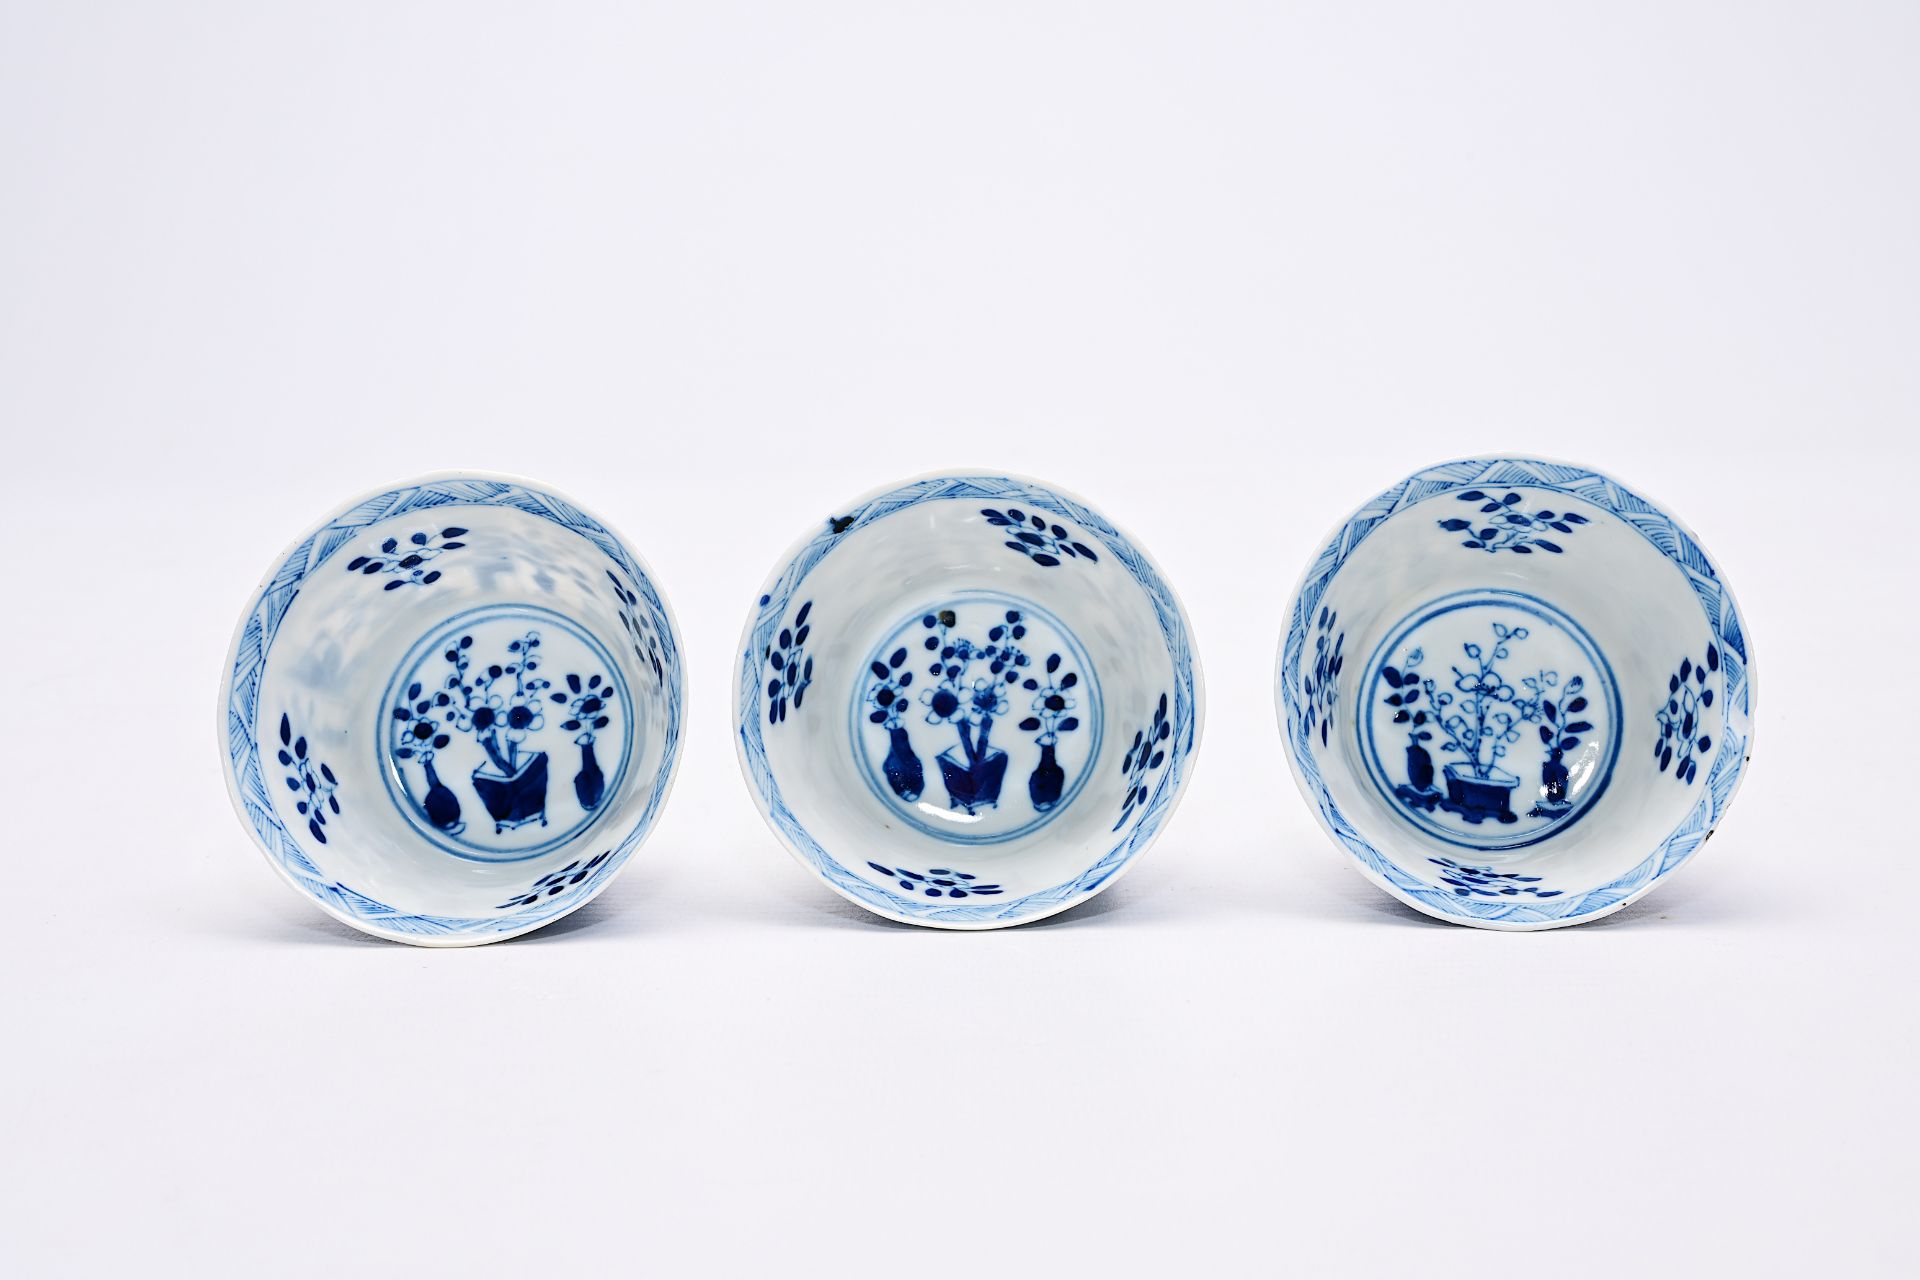 A varied collection of Chinese blue and white porcelain with floral design and figures in a landscap - Image 14 of 22